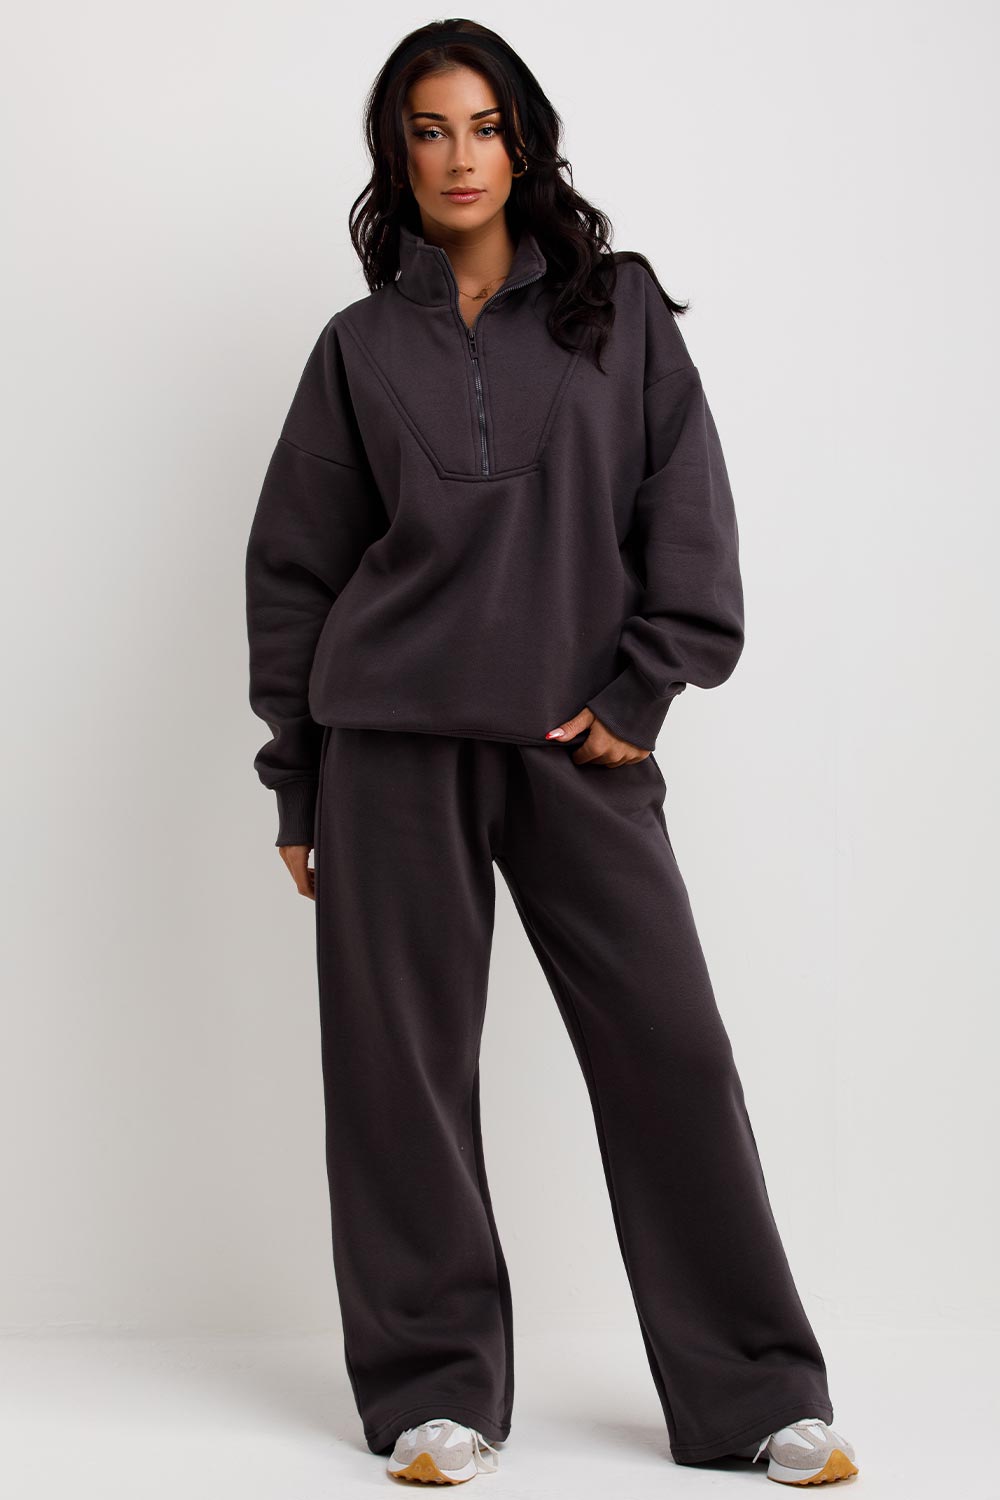 womens half zip sweatshirt and joggers tracksuit set airport outfit